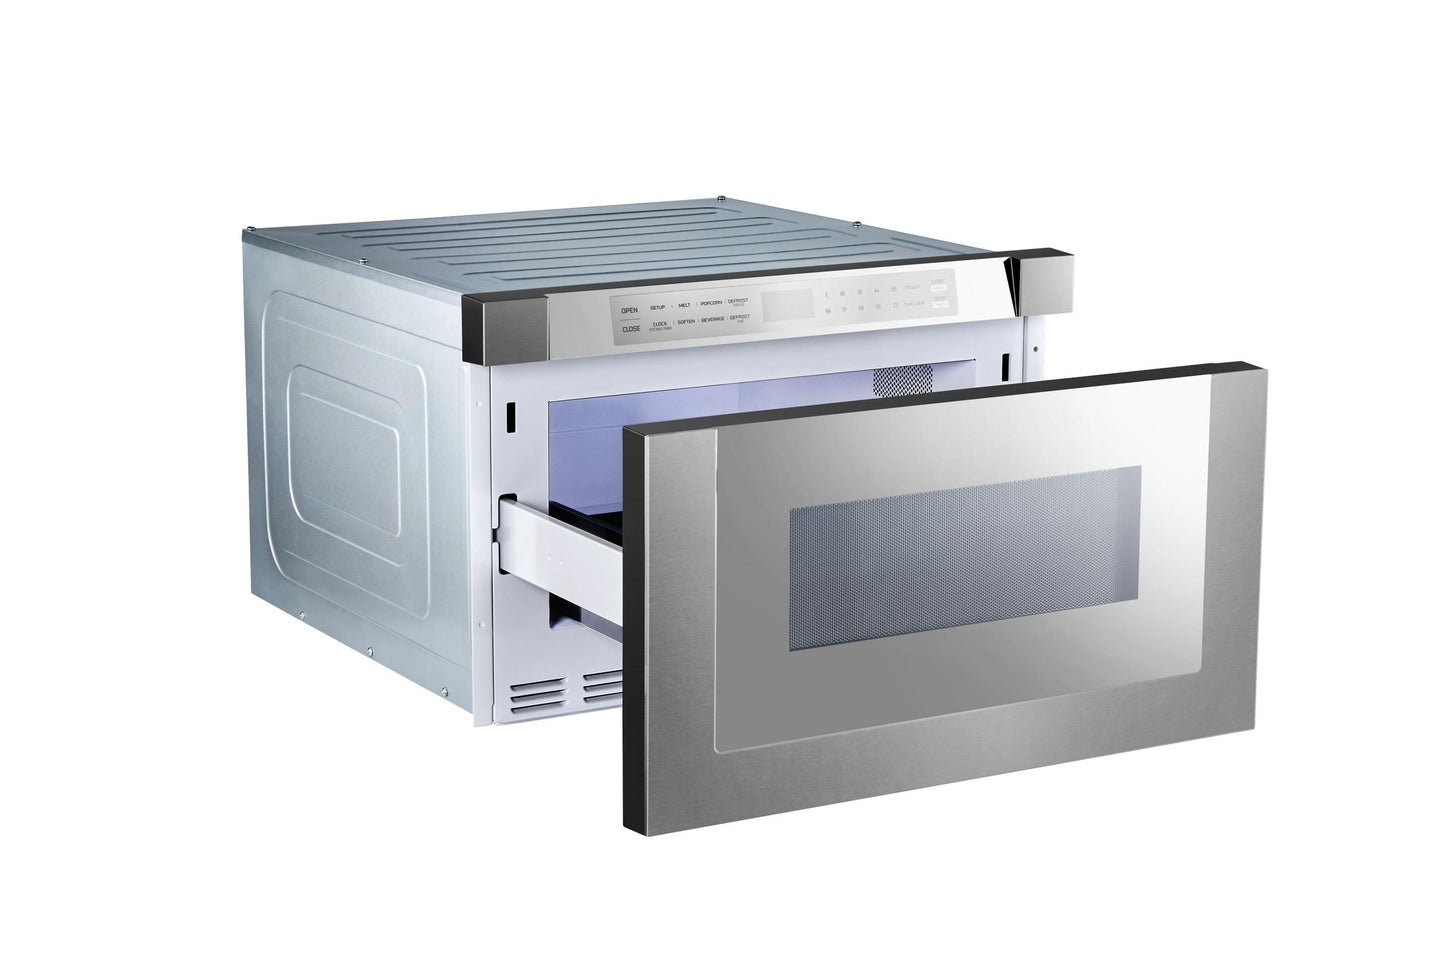 Xo Appliance XOMWD24SM 24" Built-In Microwave Drawer - Silver Mirror Finish